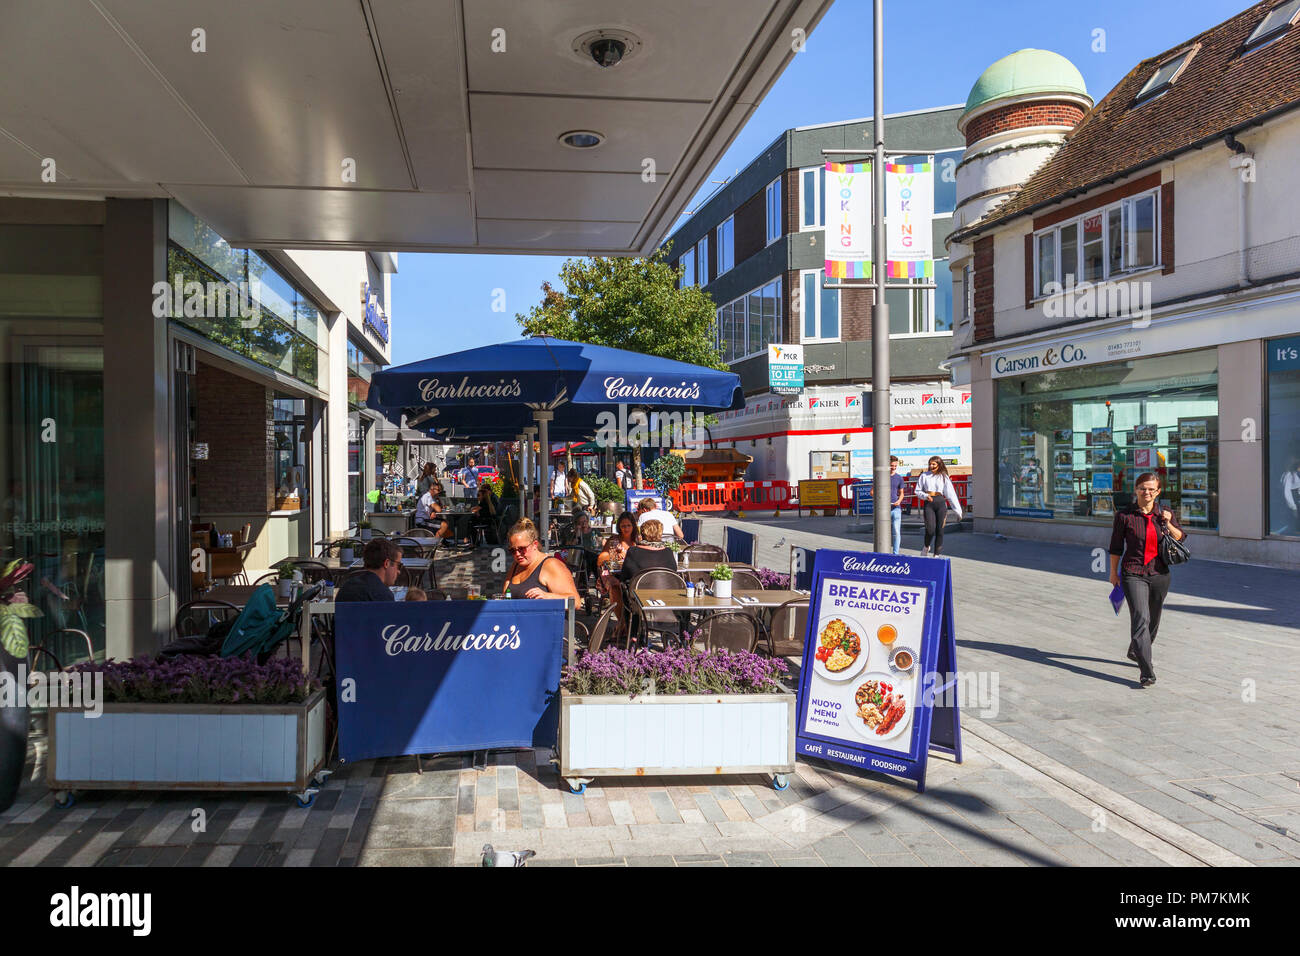 Outside street side dining at Carluccio's restaurant in pedestrianised Commercial Way, Woking town centre, Surrey, UK on a sunny day Stock Photo